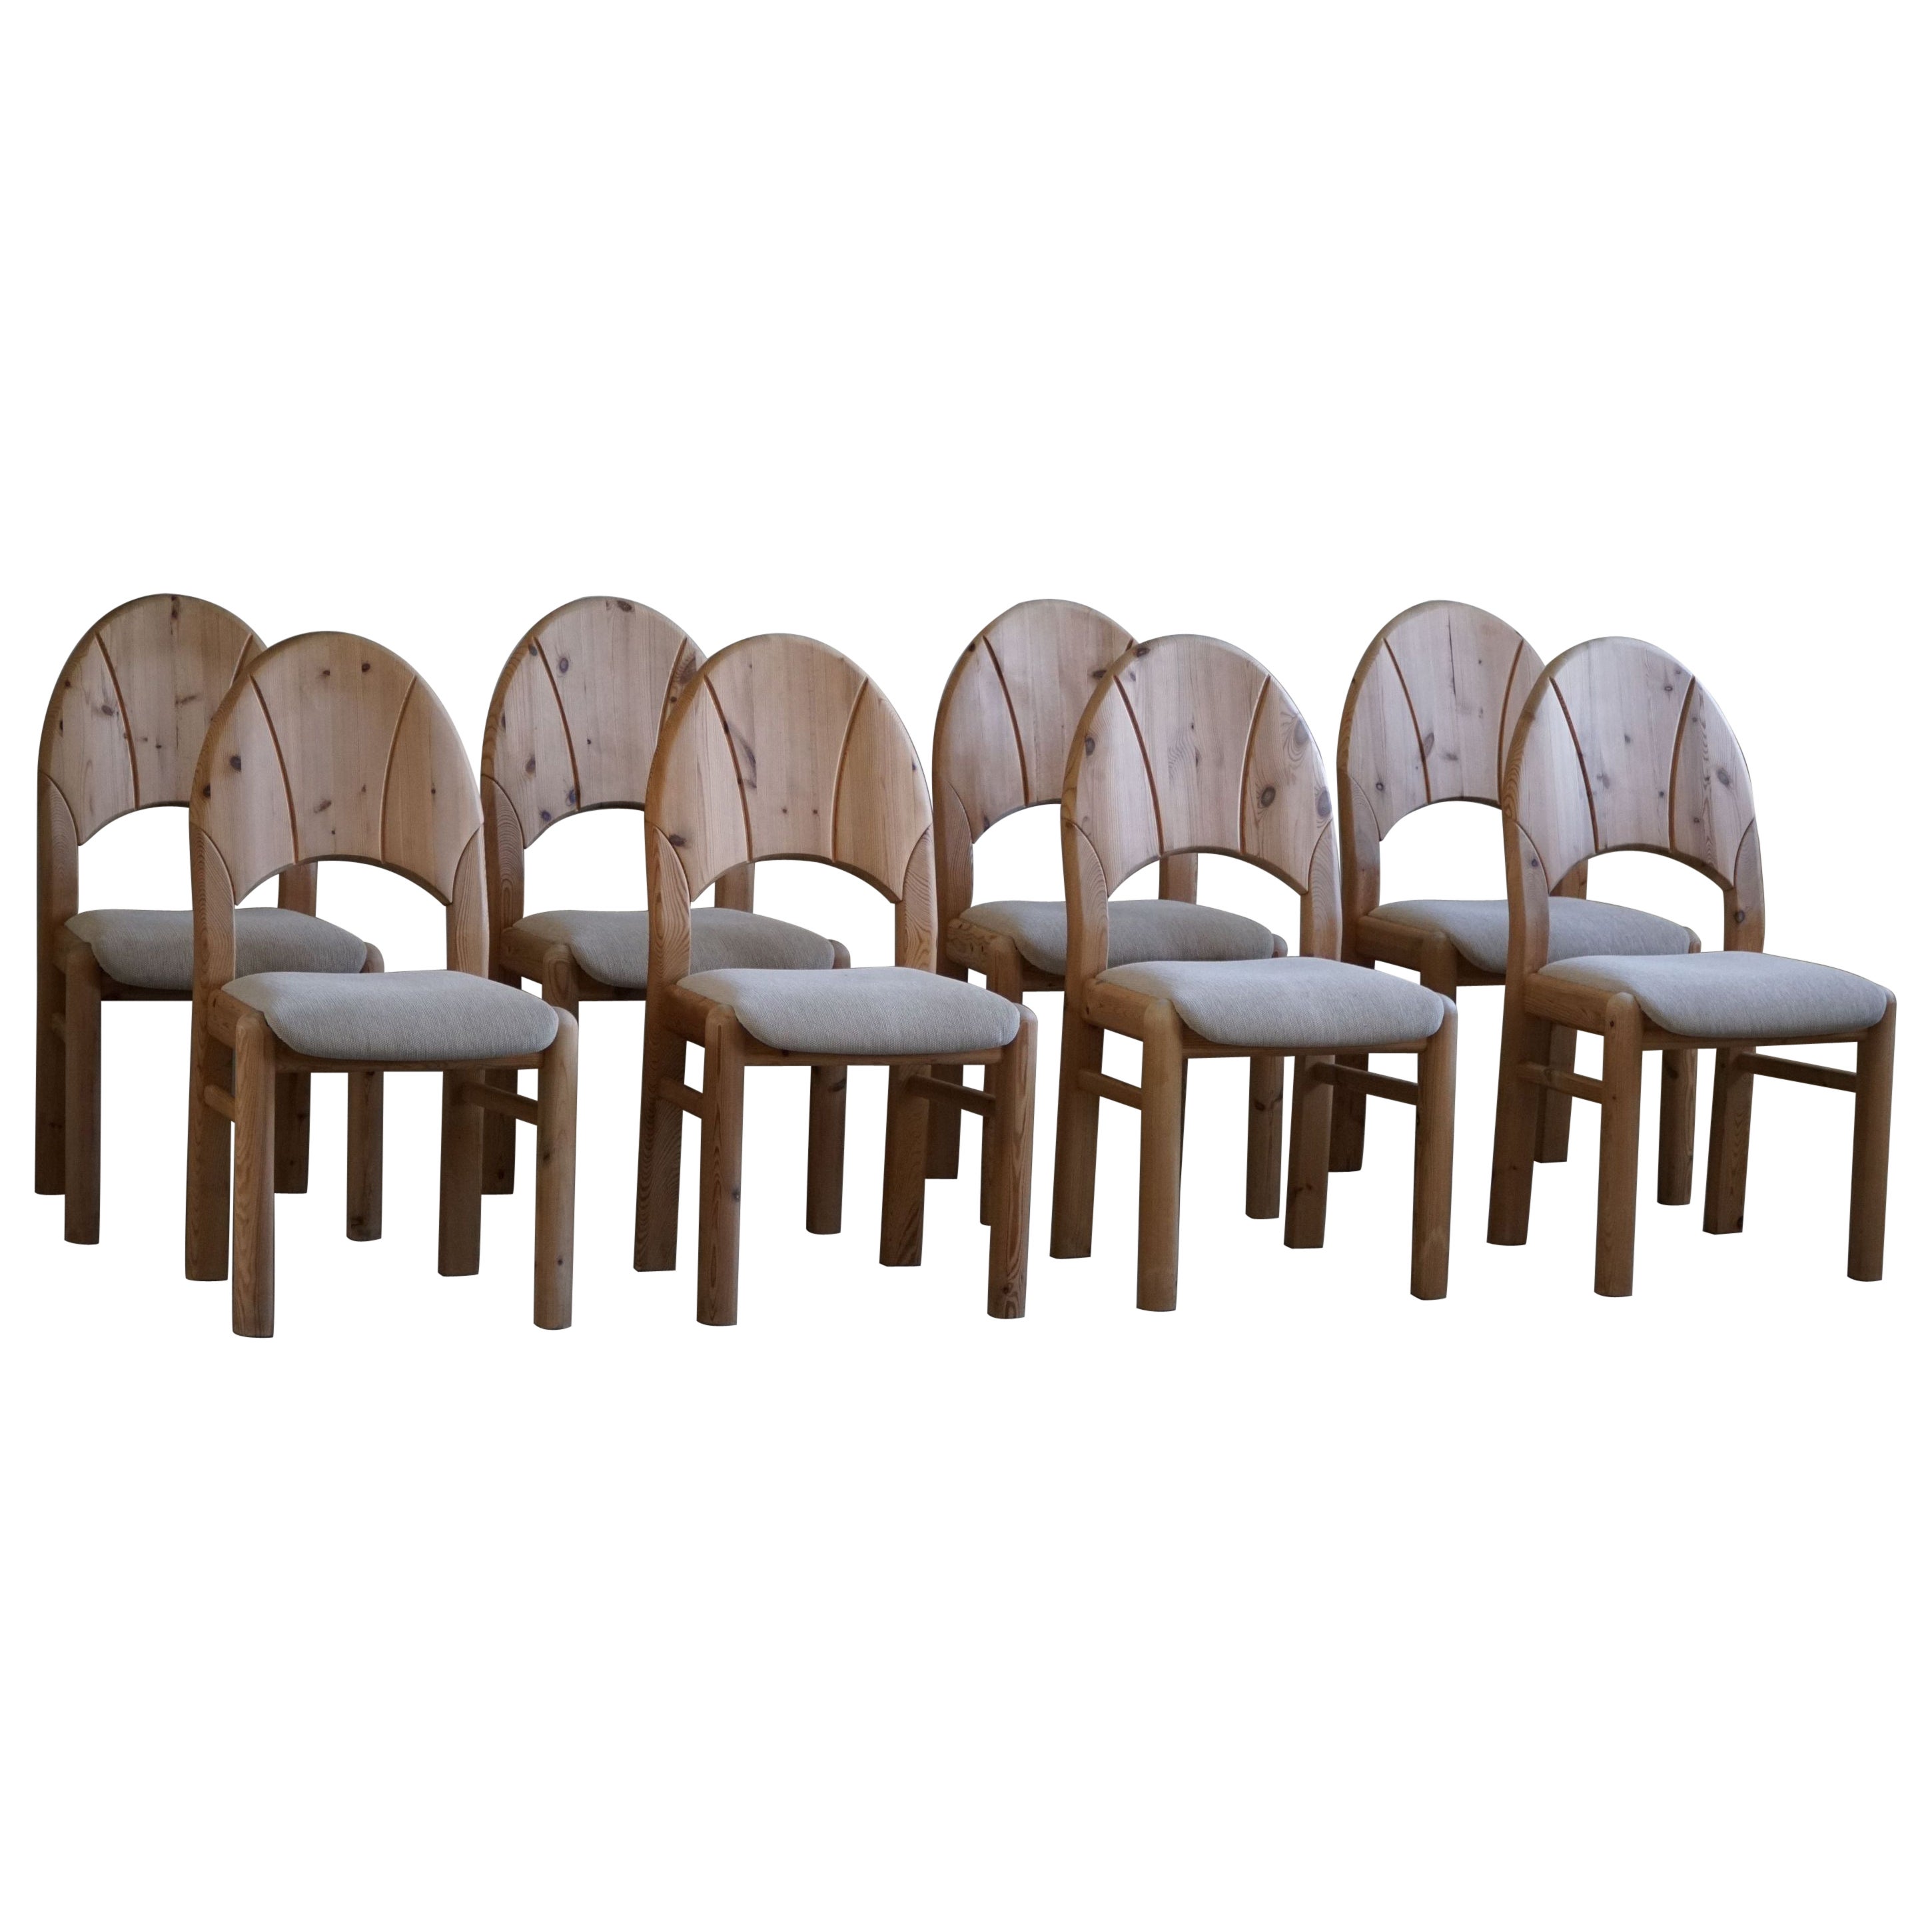 Set of 8 Sculptural Danish Modern Brutalist Chairs in Pine & Wool, 1970s For Sale